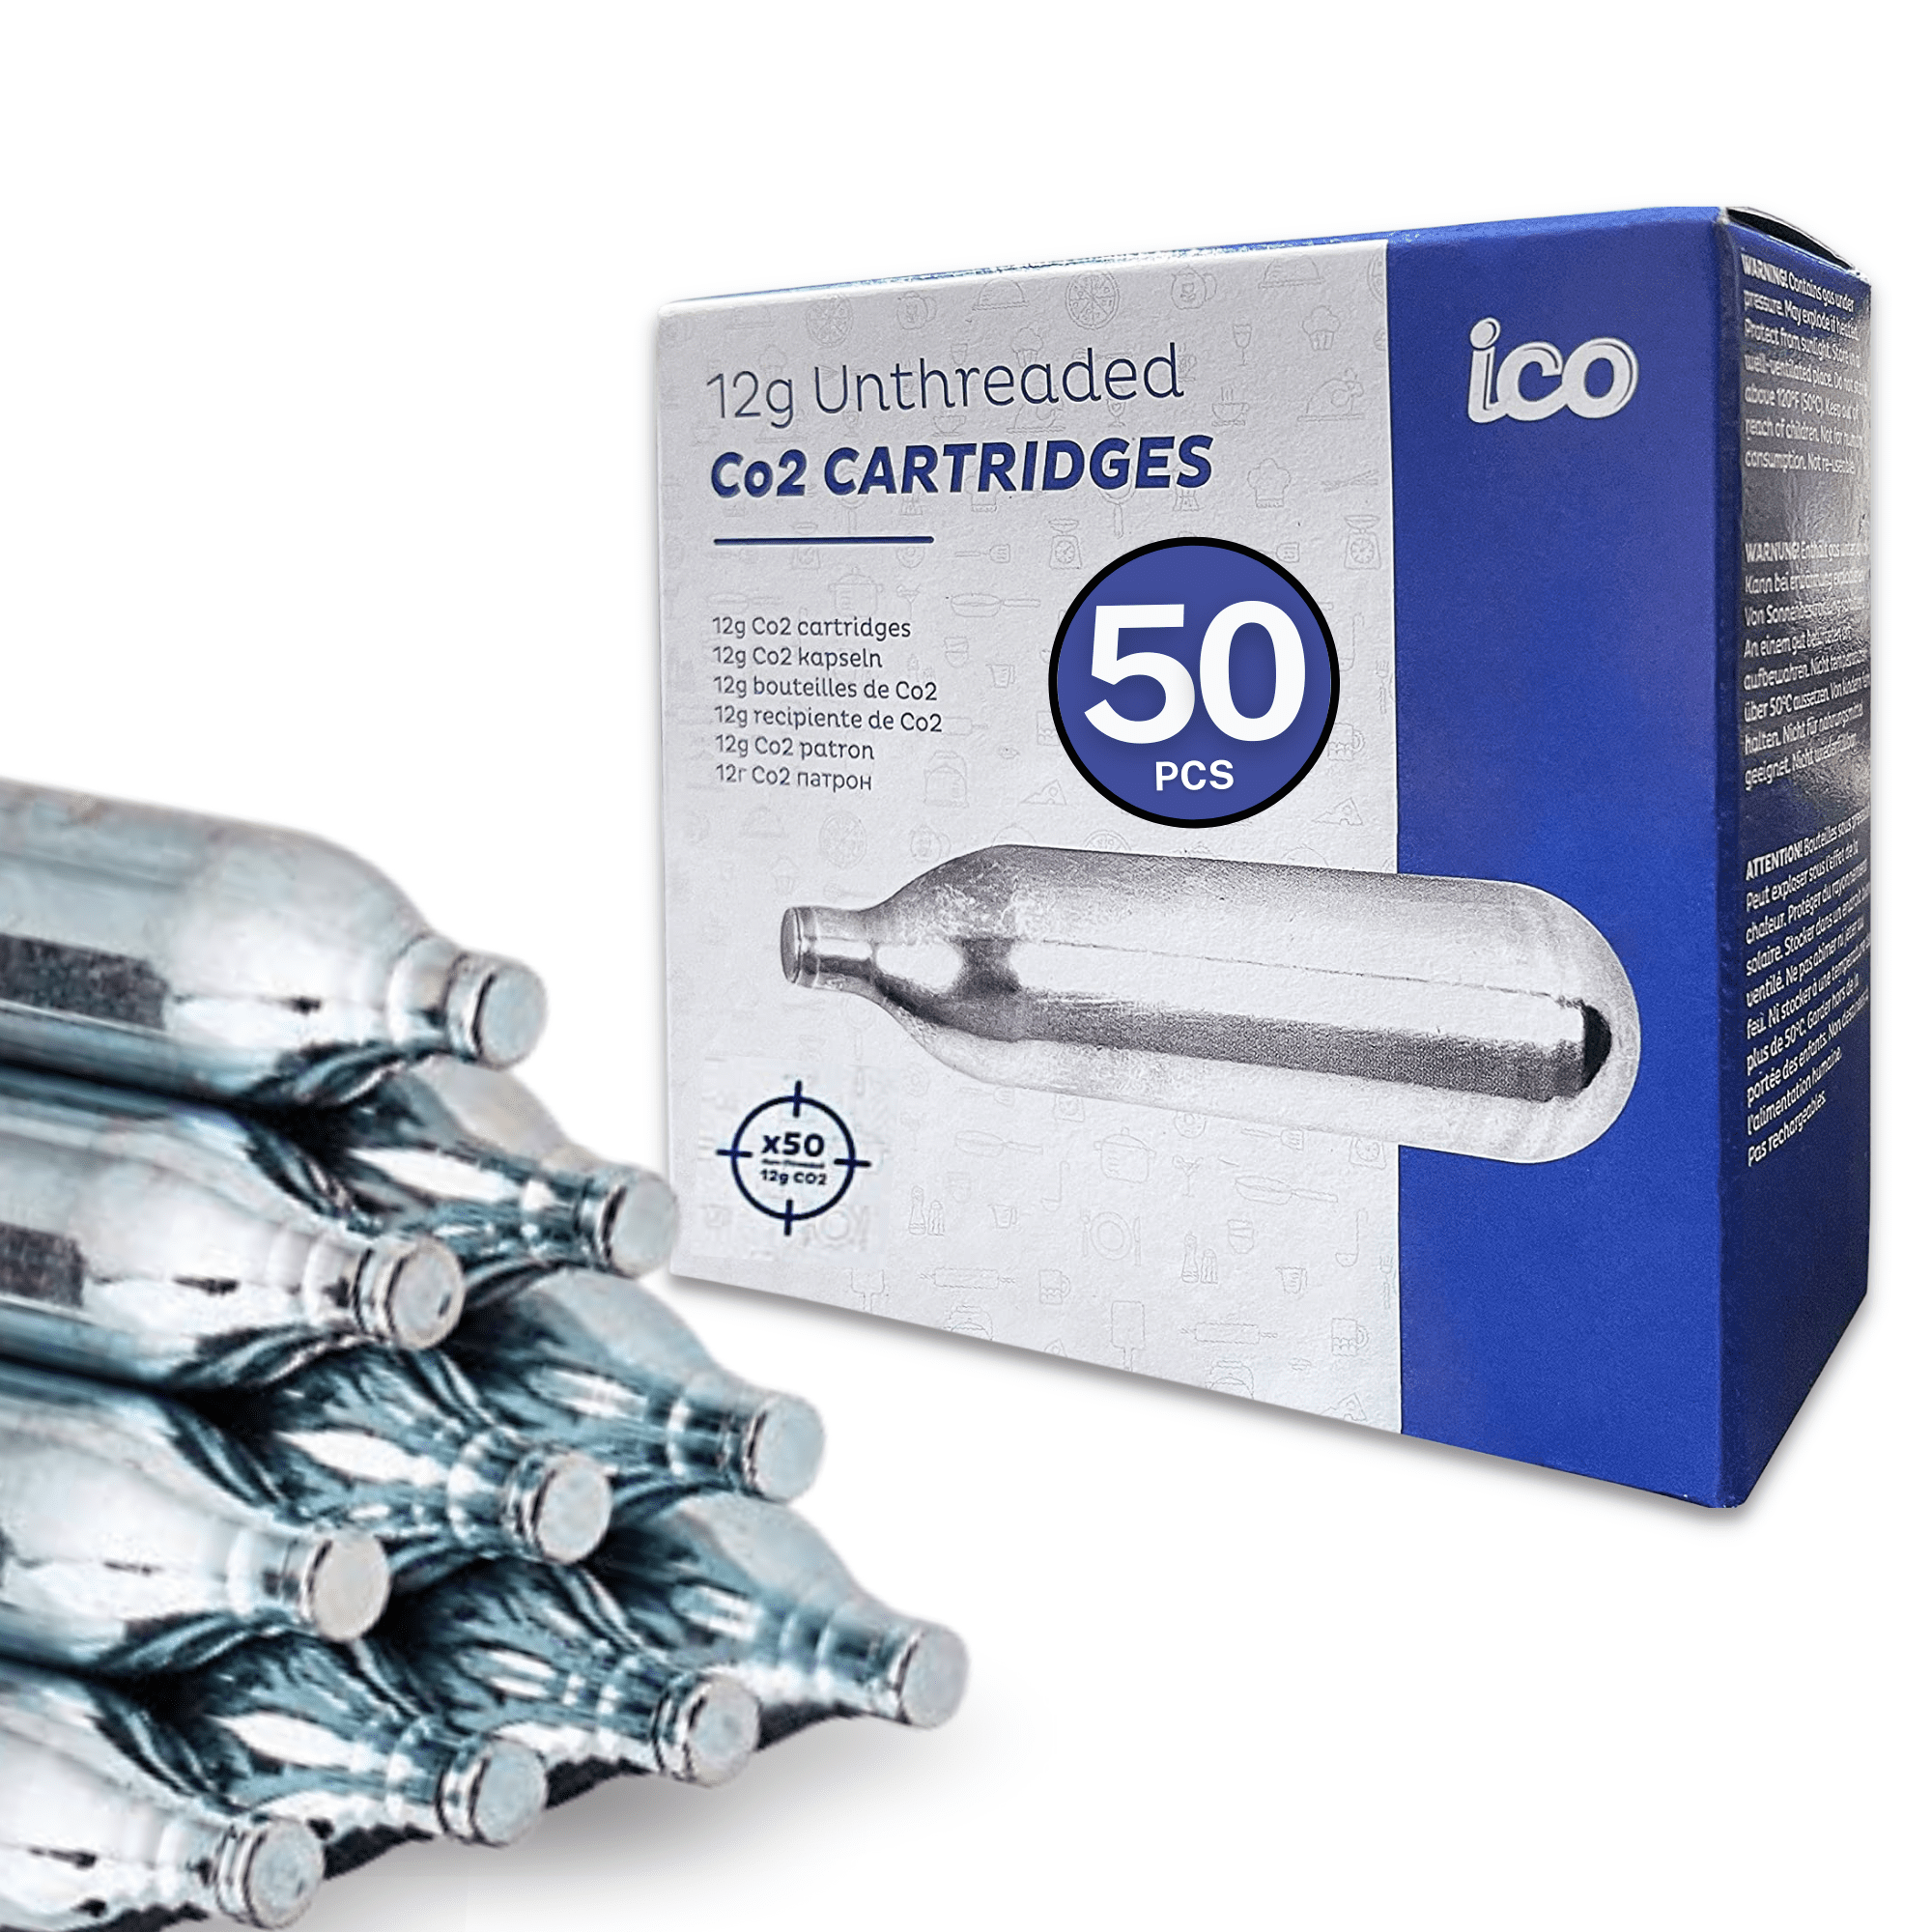 30 x 8g Cartridge Soda CO2 Chargers Bulb Brew Beer Home Natural Gas Non-Threaded 